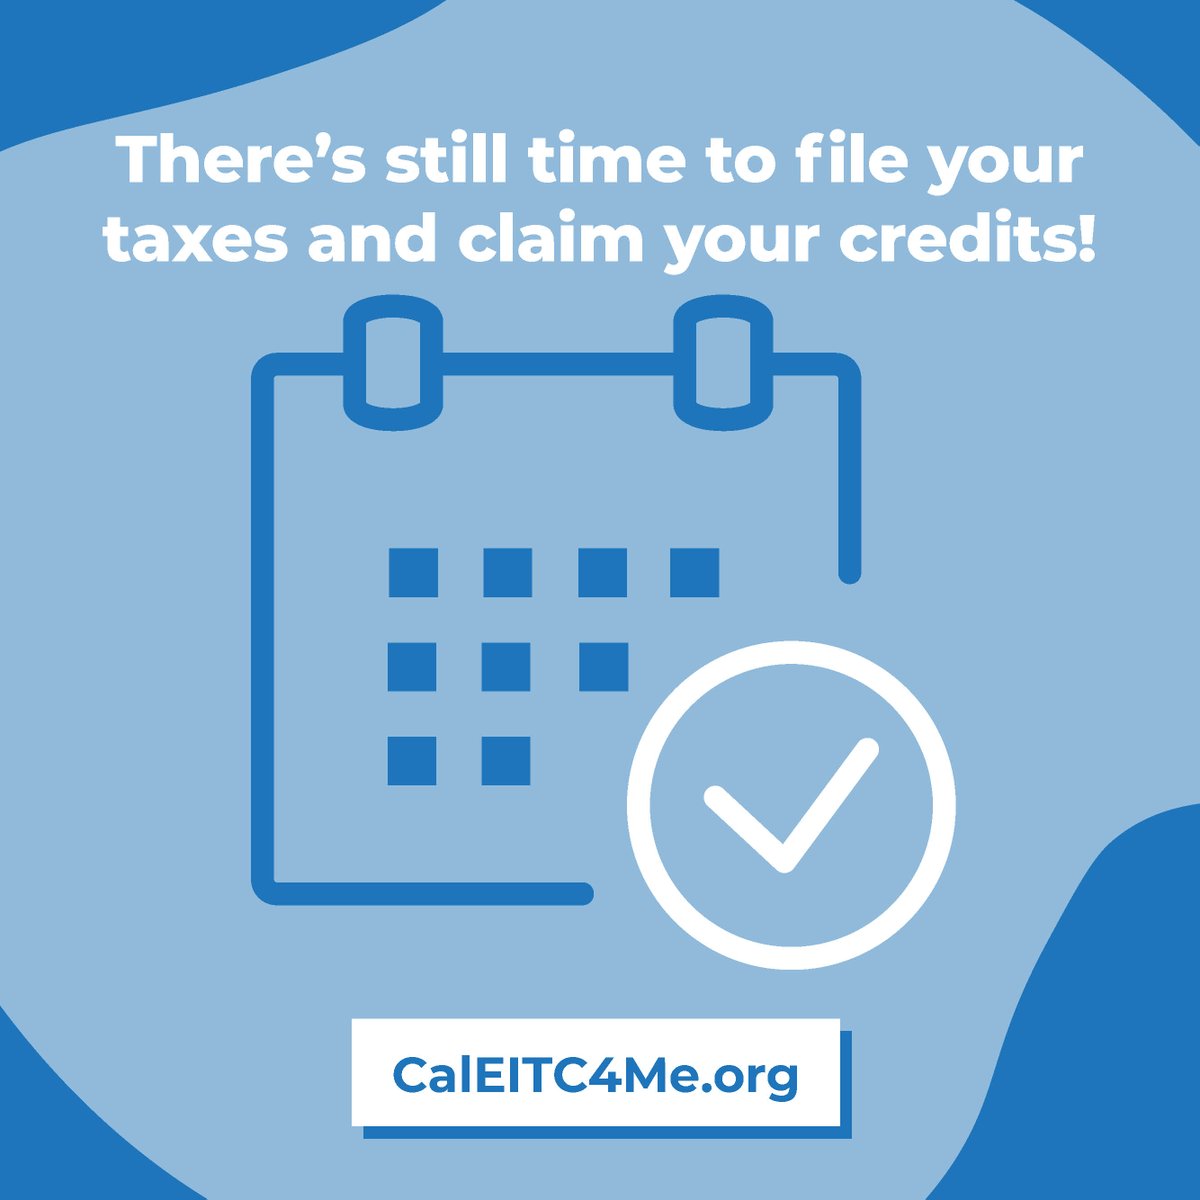 There’s still time to file your taxes and claim your credits! If you don’t owe taxes, you have until October 15 to file with no penalties. Find out what you qualify for and find a free tax preparer near you at caleitc.org